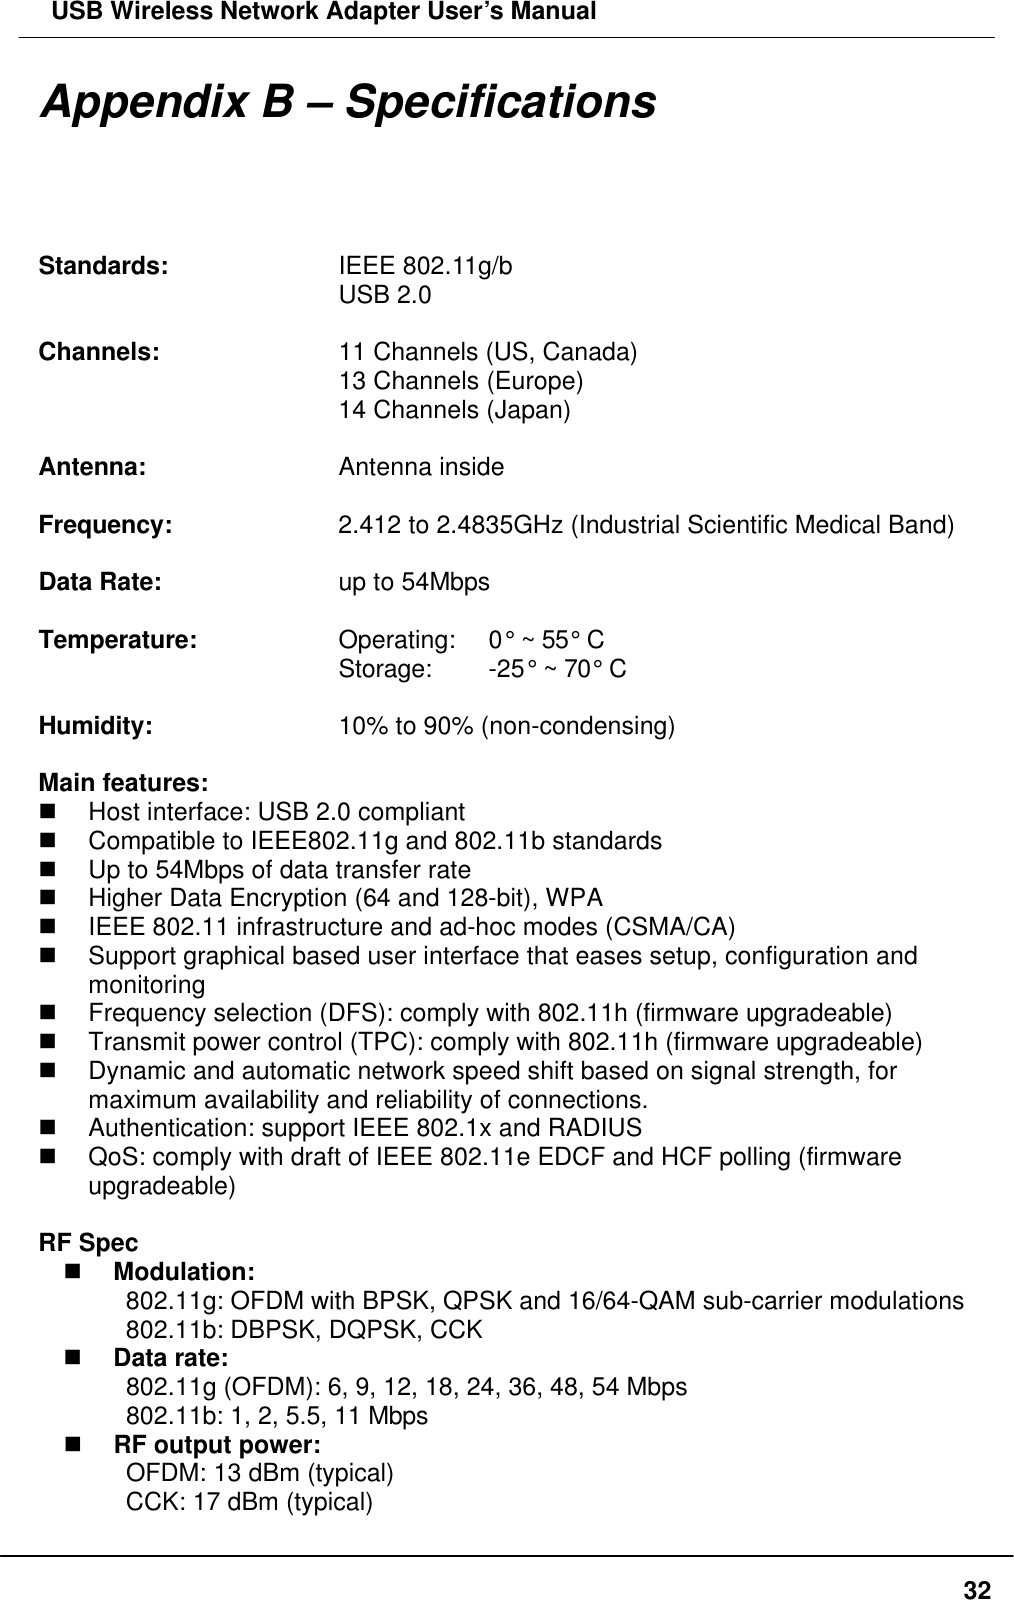  USB Wireless Network Adapter User’s Manual  32Appendix B – Specifications Standards:    IEEE 802.11g/b       USB 2.0  Channels:    11 Channels (US, Canada)       13 Channels (Europe)       14 Channels (Japan)  Antenna:    Antenna inside  Frequency:    2.412 to 2.4835GHz (Industrial Scientific Medical Band)  Data Rate:    up to 54Mbps       Temperature:   Operating:   0° ~ 55° C       Storage:   -25° ~ 70° C  Humidity:    10% to 90% (non-condensing)  Main features: n Host interface: USB 2.0 compliant n Compatible to IEEE802.11g and 802.11b standards n Up to 54Mbps of data transfer rate n Higher Data Encryption (64 and 128-bit), WPA   n IEEE 802.11 infrastructure and ad-hoc modes (CSMA/CA) n Support graphical based user interface that eases setup, configuration and monitoring n Frequency selection (DFS): comply with 802.11h (firmware upgradeable) n Transmit power control (TPC): comply with 802.11h (firmware upgradeable) n Dynamic and automatic network speed shift based on signal strength, for maximum availability and reliability of connections. n Authentication: support IEEE 802.1x and RADIUS n QoS: comply with draft of IEEE 802.11e EDCF and HCF polling (firmware upgradeable)  RF Spec n Modulation: 802.11g: OFDM with BPSK, QPSK and 16/64-QAM sub-carrier modulations 802.11b: DBPSK, DQPSK, CCK n Data rate: 802.11g (OFDM): 6, 9, 12, 18, 24, 36, 48, 54 Mbps 802.11b: 1, 2, 5.5, 11 Mbps n RF output power:     OFDM: 13 dBm (typical)     CCK: 17 dBm (typical) 